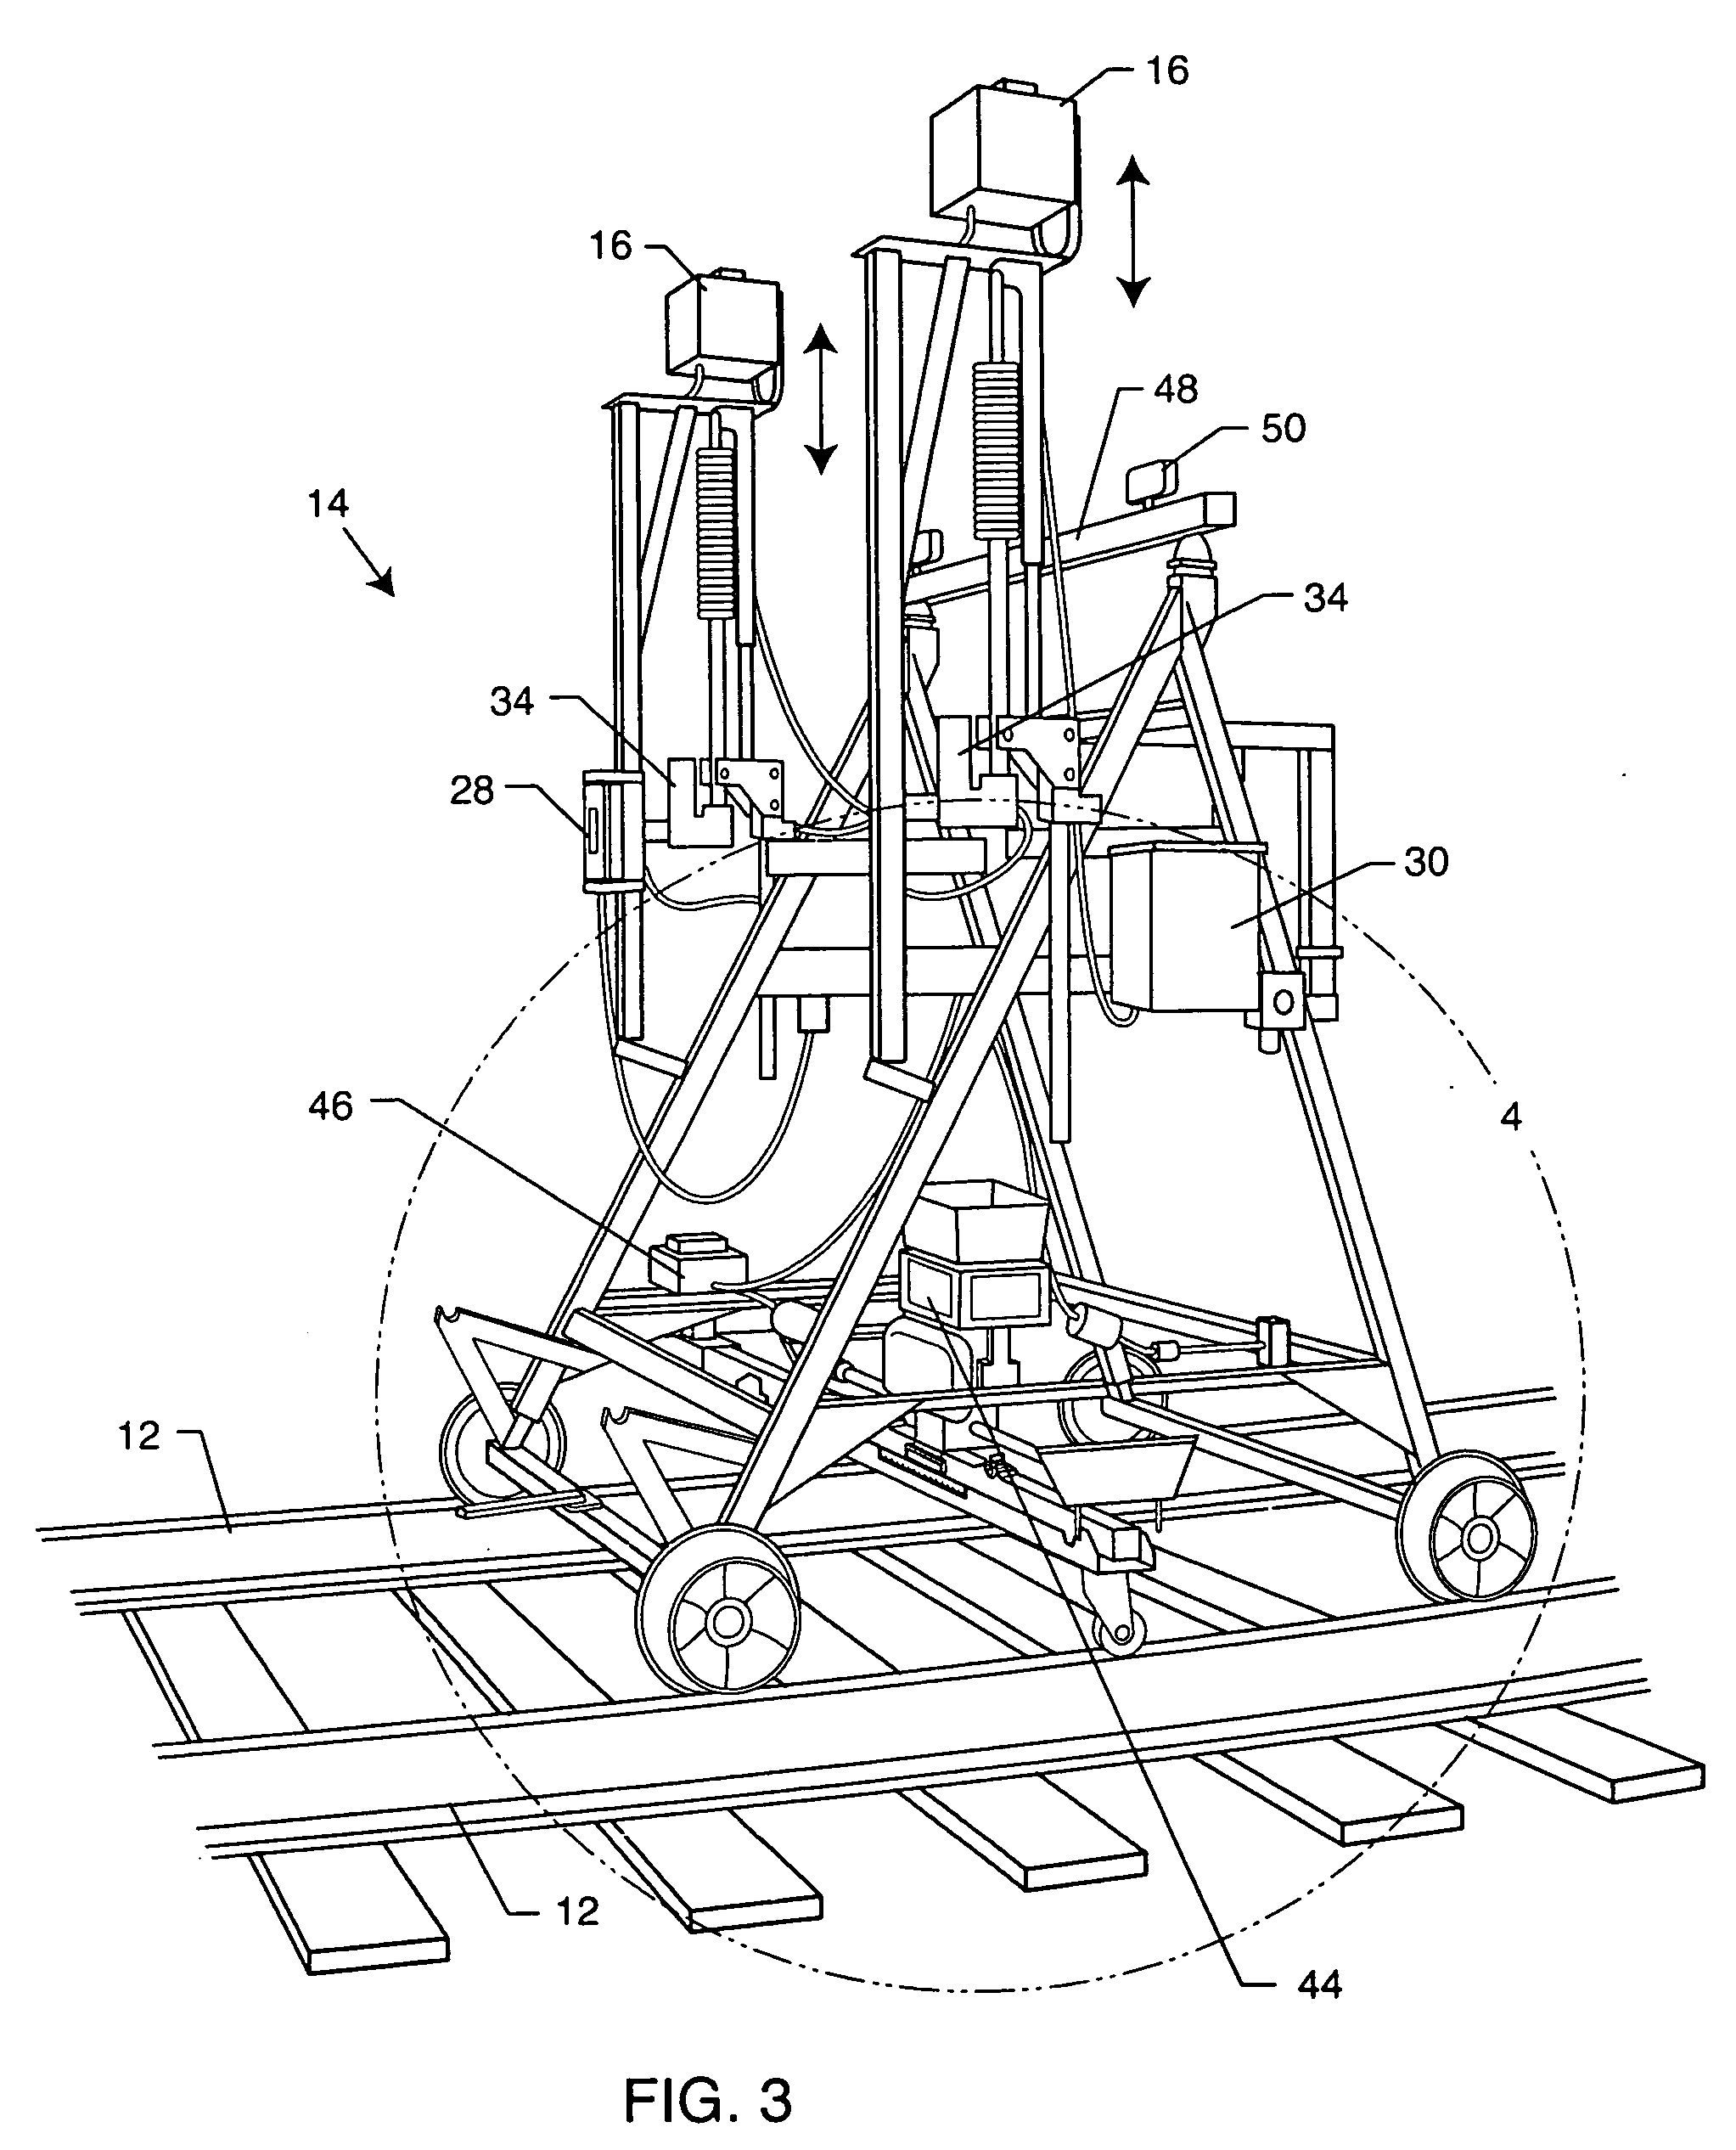 Method and system for controlling railroad surfacing